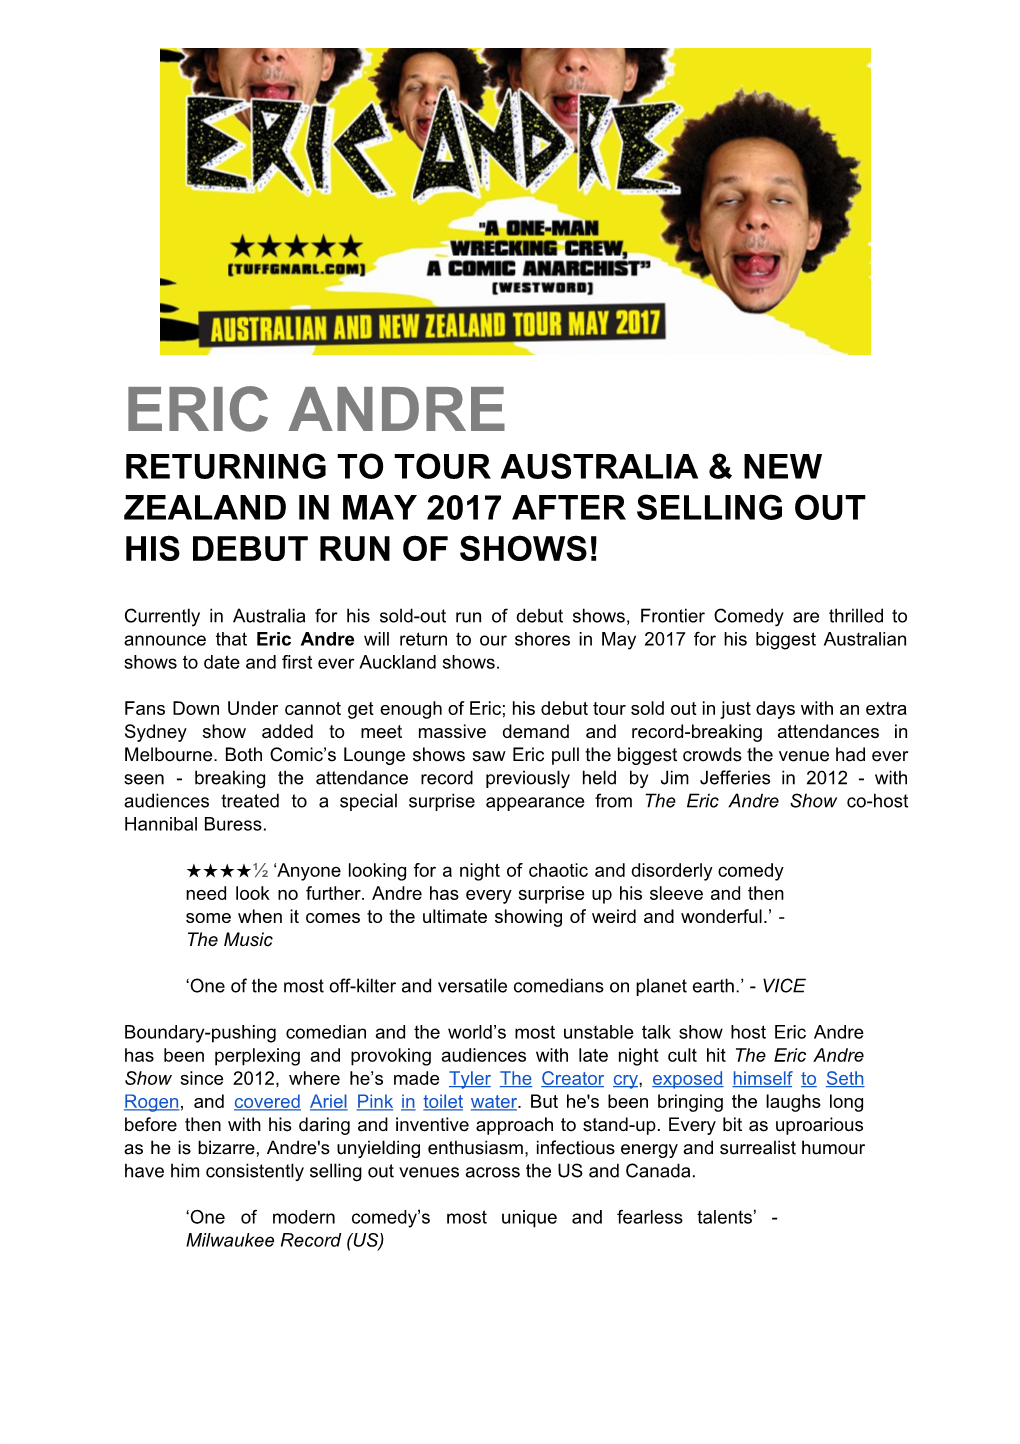 Eric Andre Returning to Tour Australia & New Zealand in May 2017 After Selling out His Debut Run of Shows!